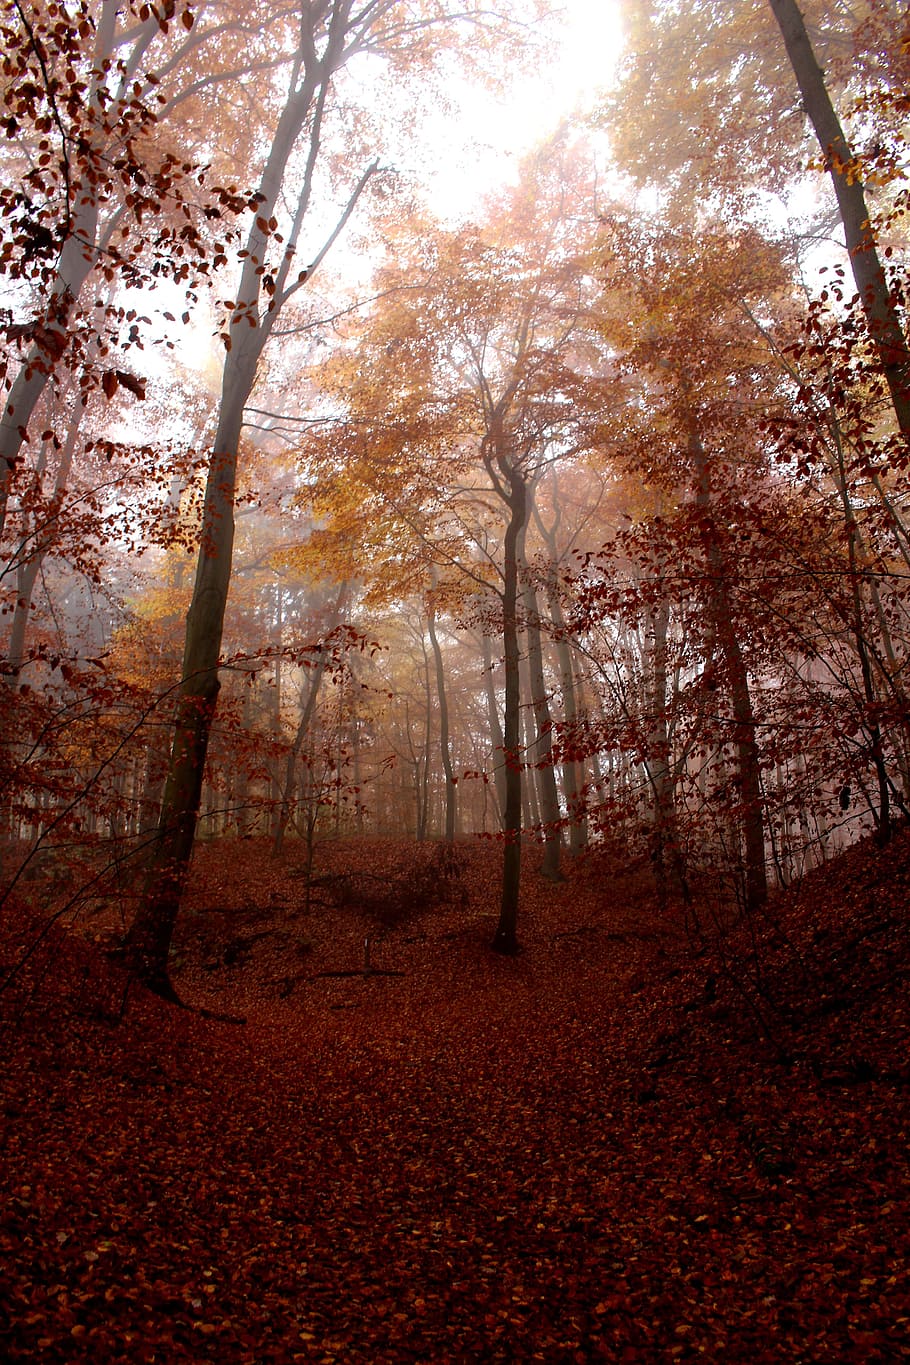 crepuscular rays, forest view, fog, forest, autumn, red, cold, mystical, mood, colourless